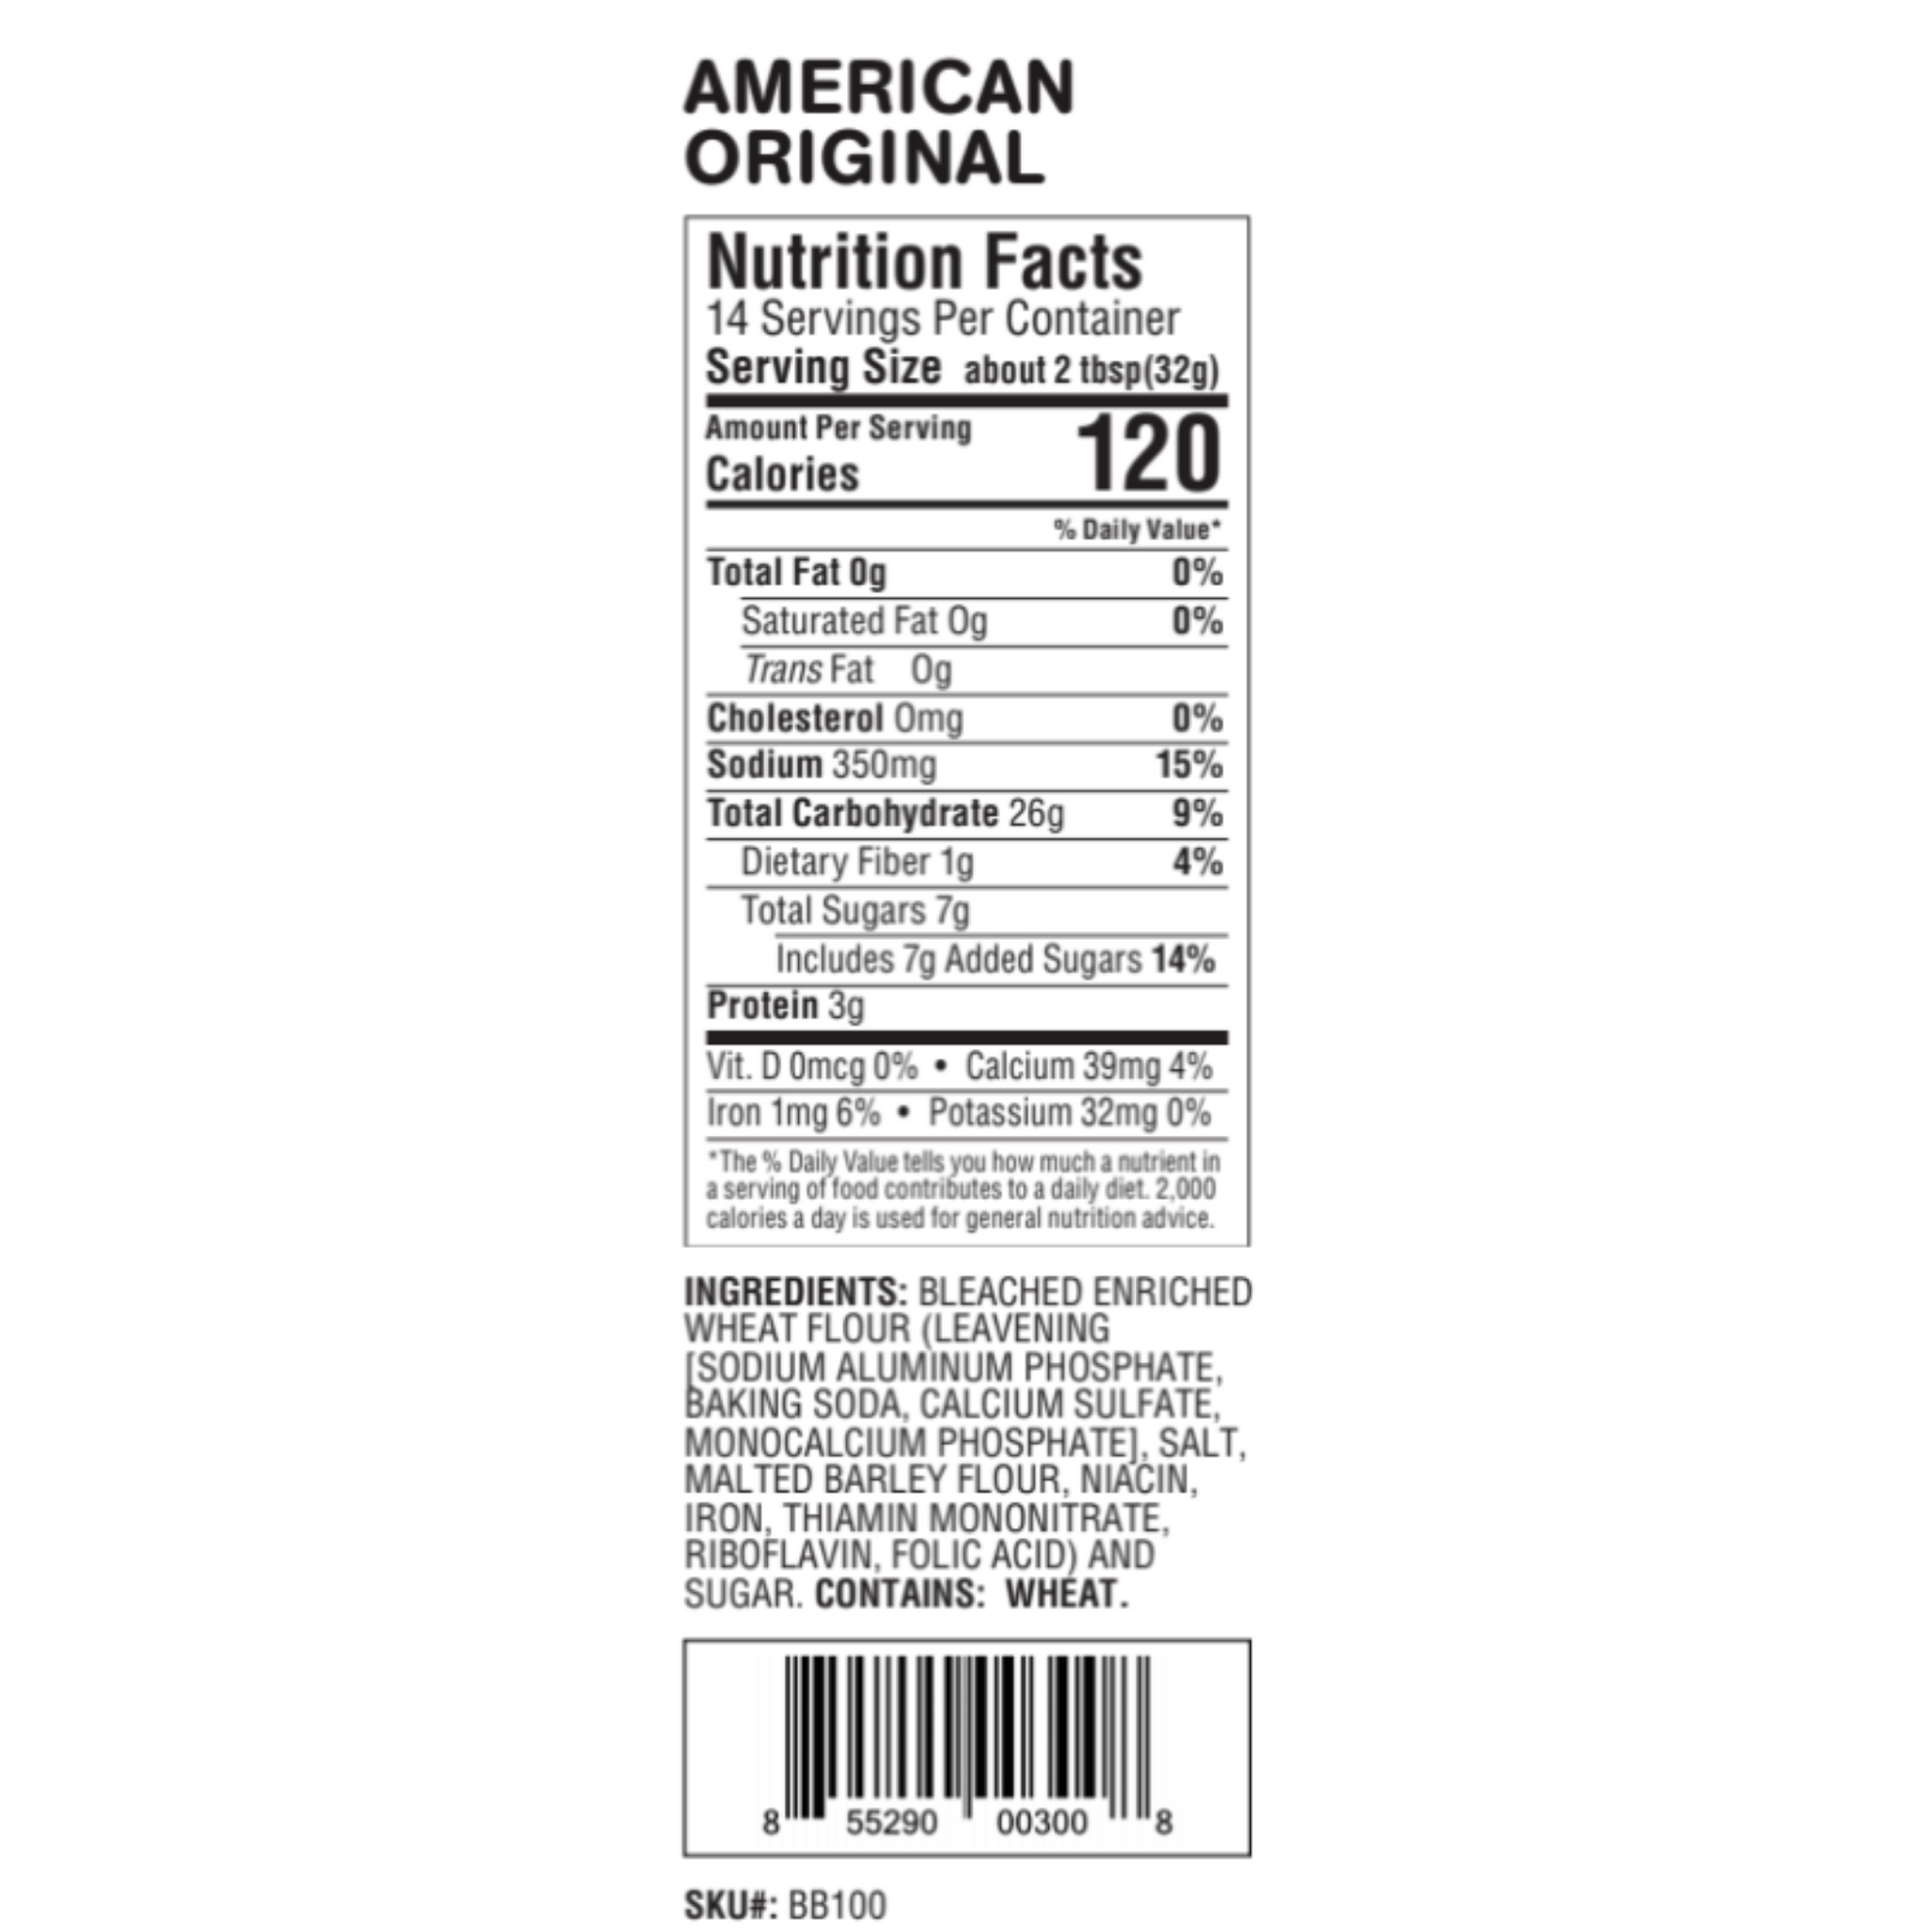 Nutrition Facts of American Original 